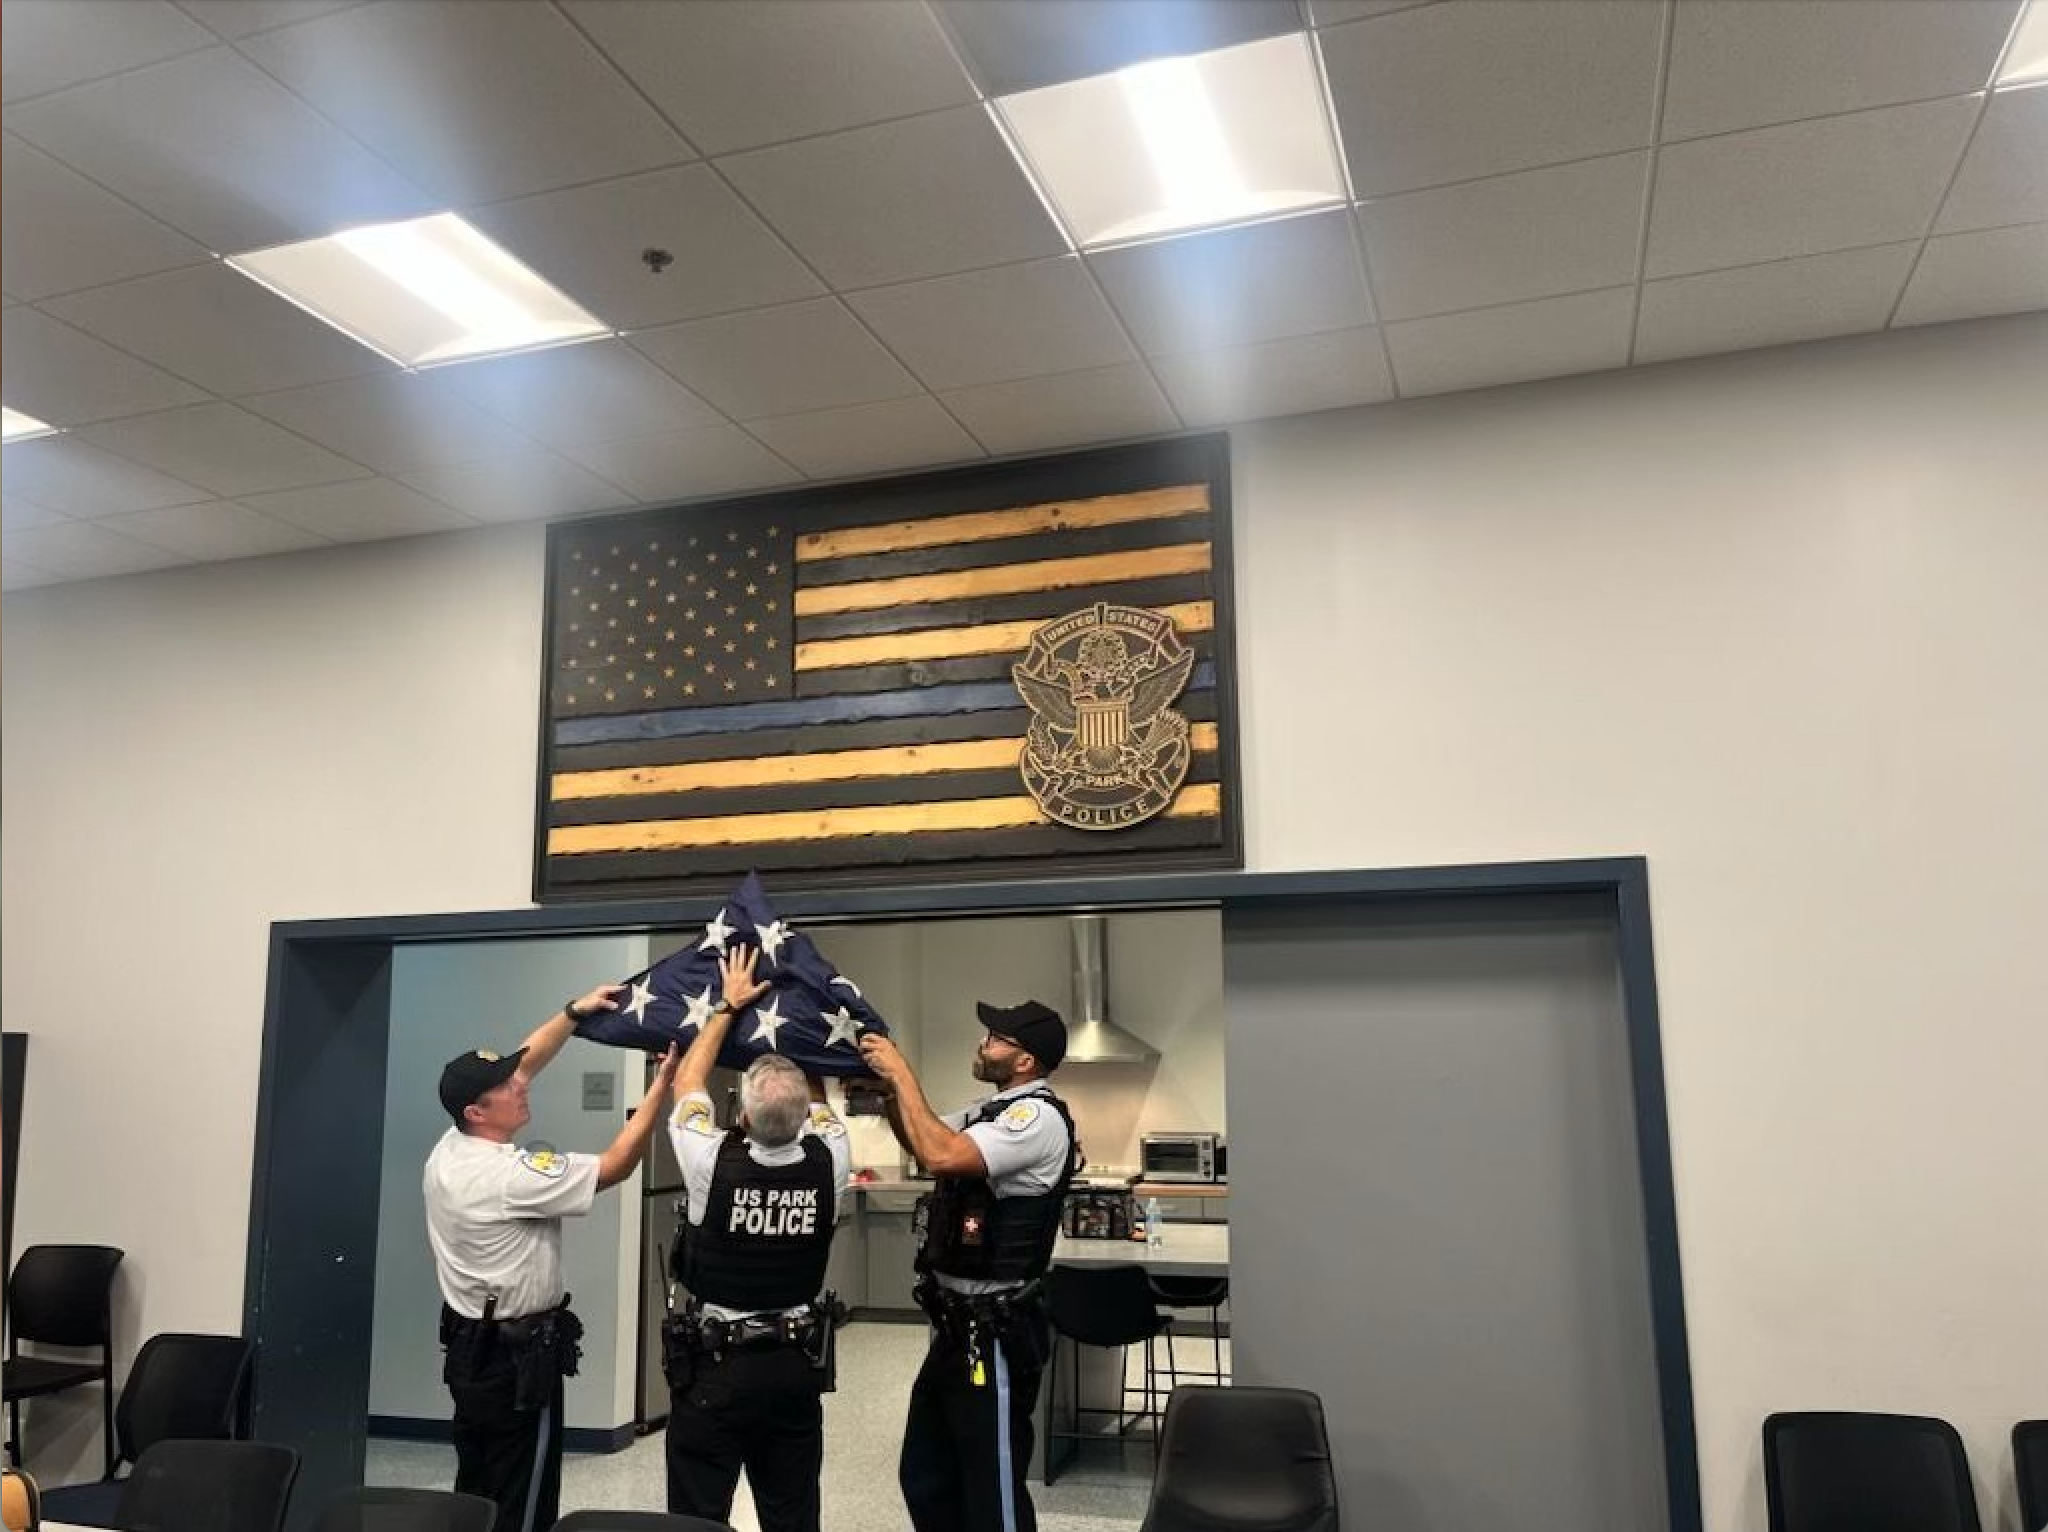 U.S. Park Police officers raise an American flag they salvaged during the protest Wednesday. (Photo Credit: Office of Congressman Bruce Westerman)